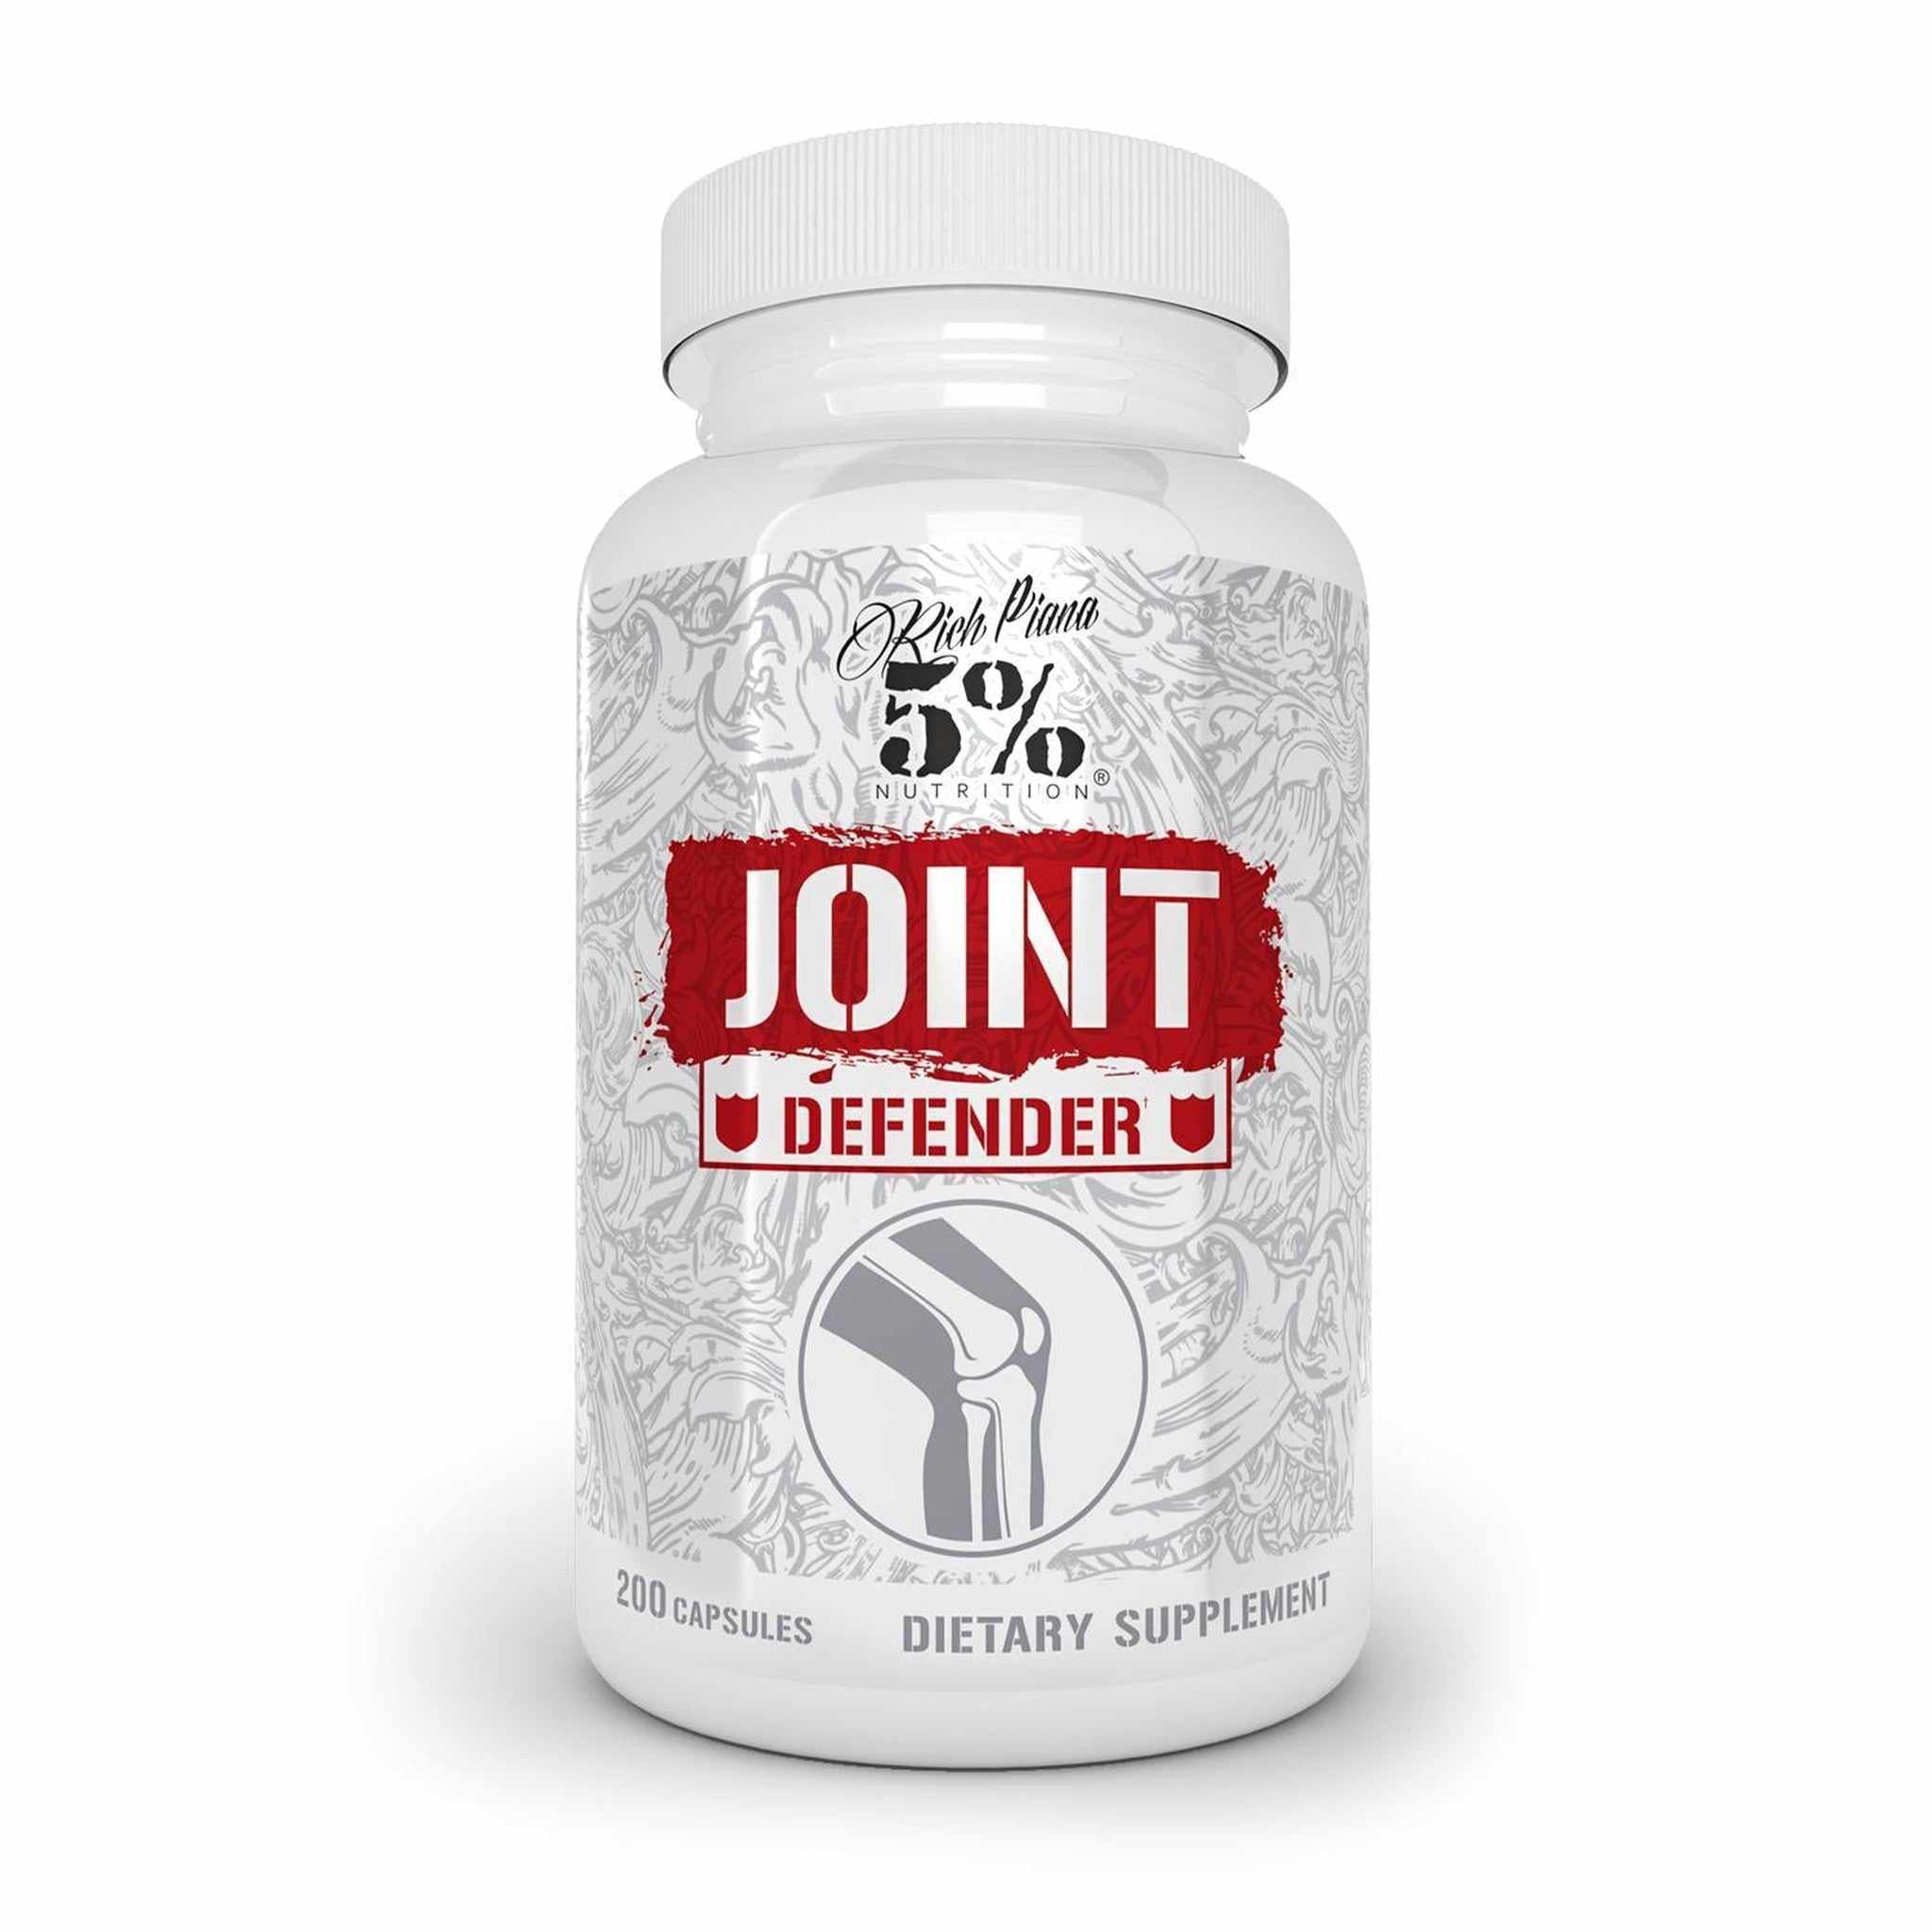 5% Nutrition Joint Defender - 200 Capsules - Ultimate Sport Nutrition